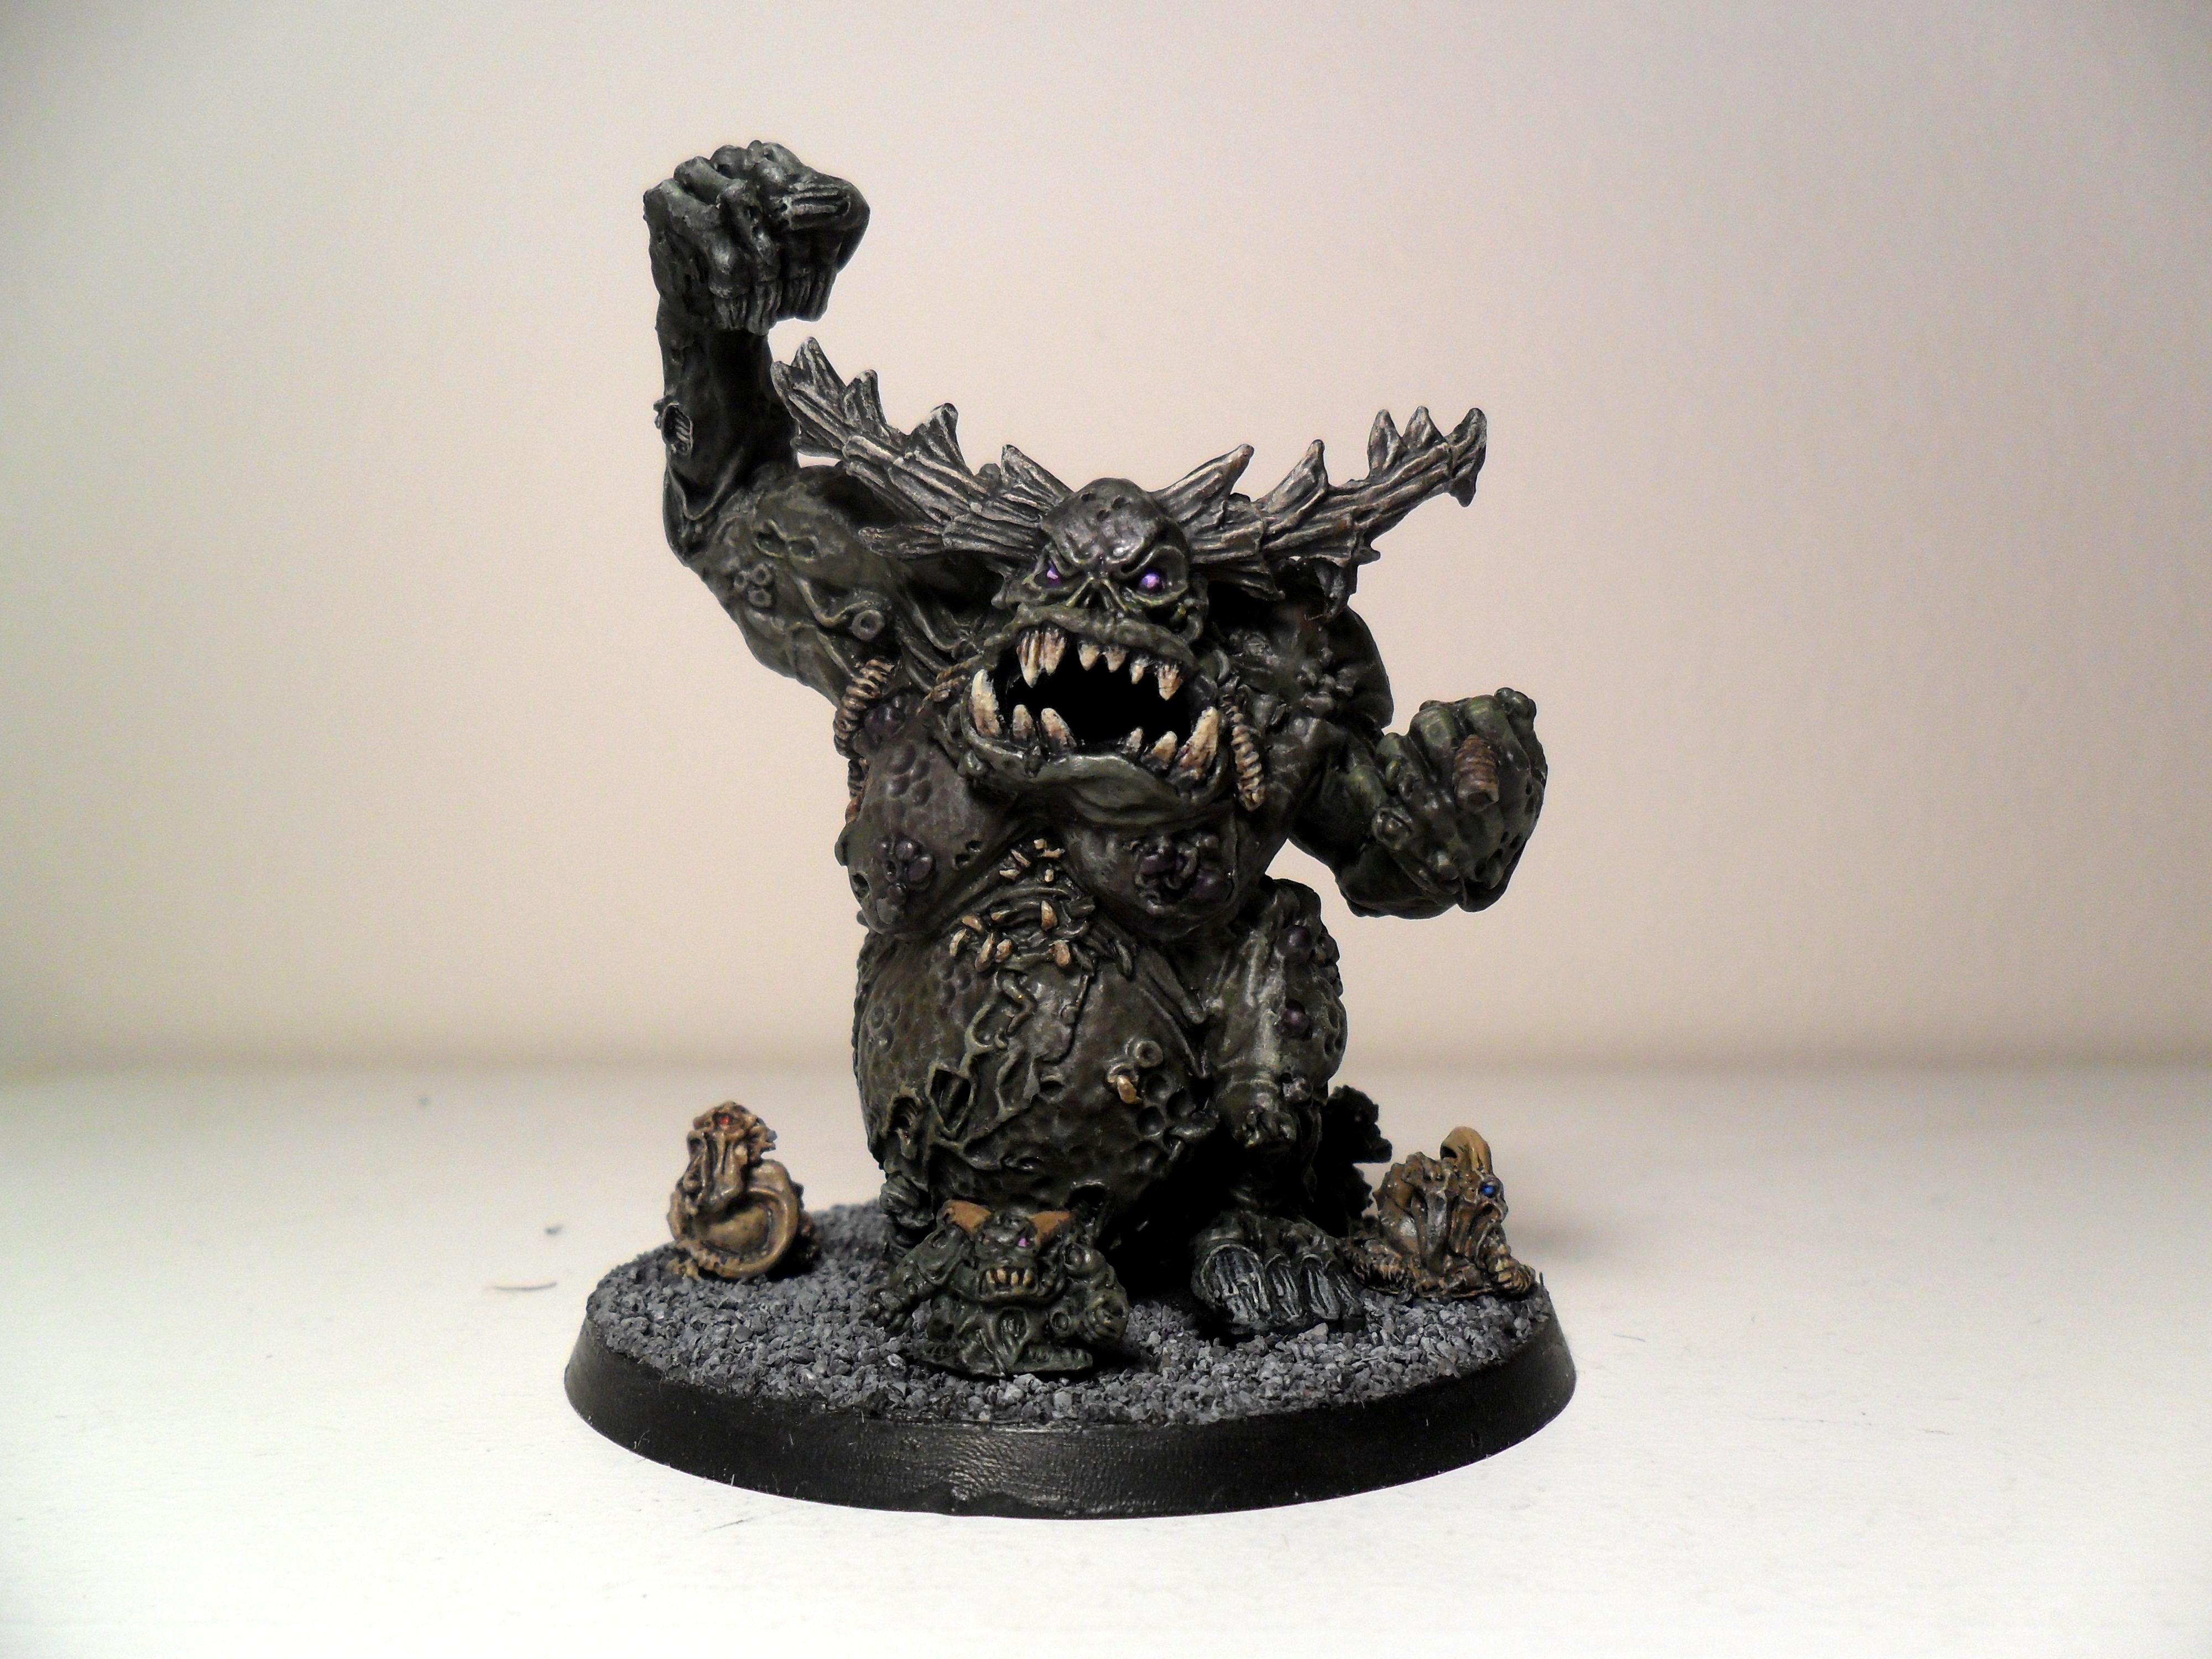 Chaos, Daemons, Great Unclean One, Nurgle, Warhammer 40,000